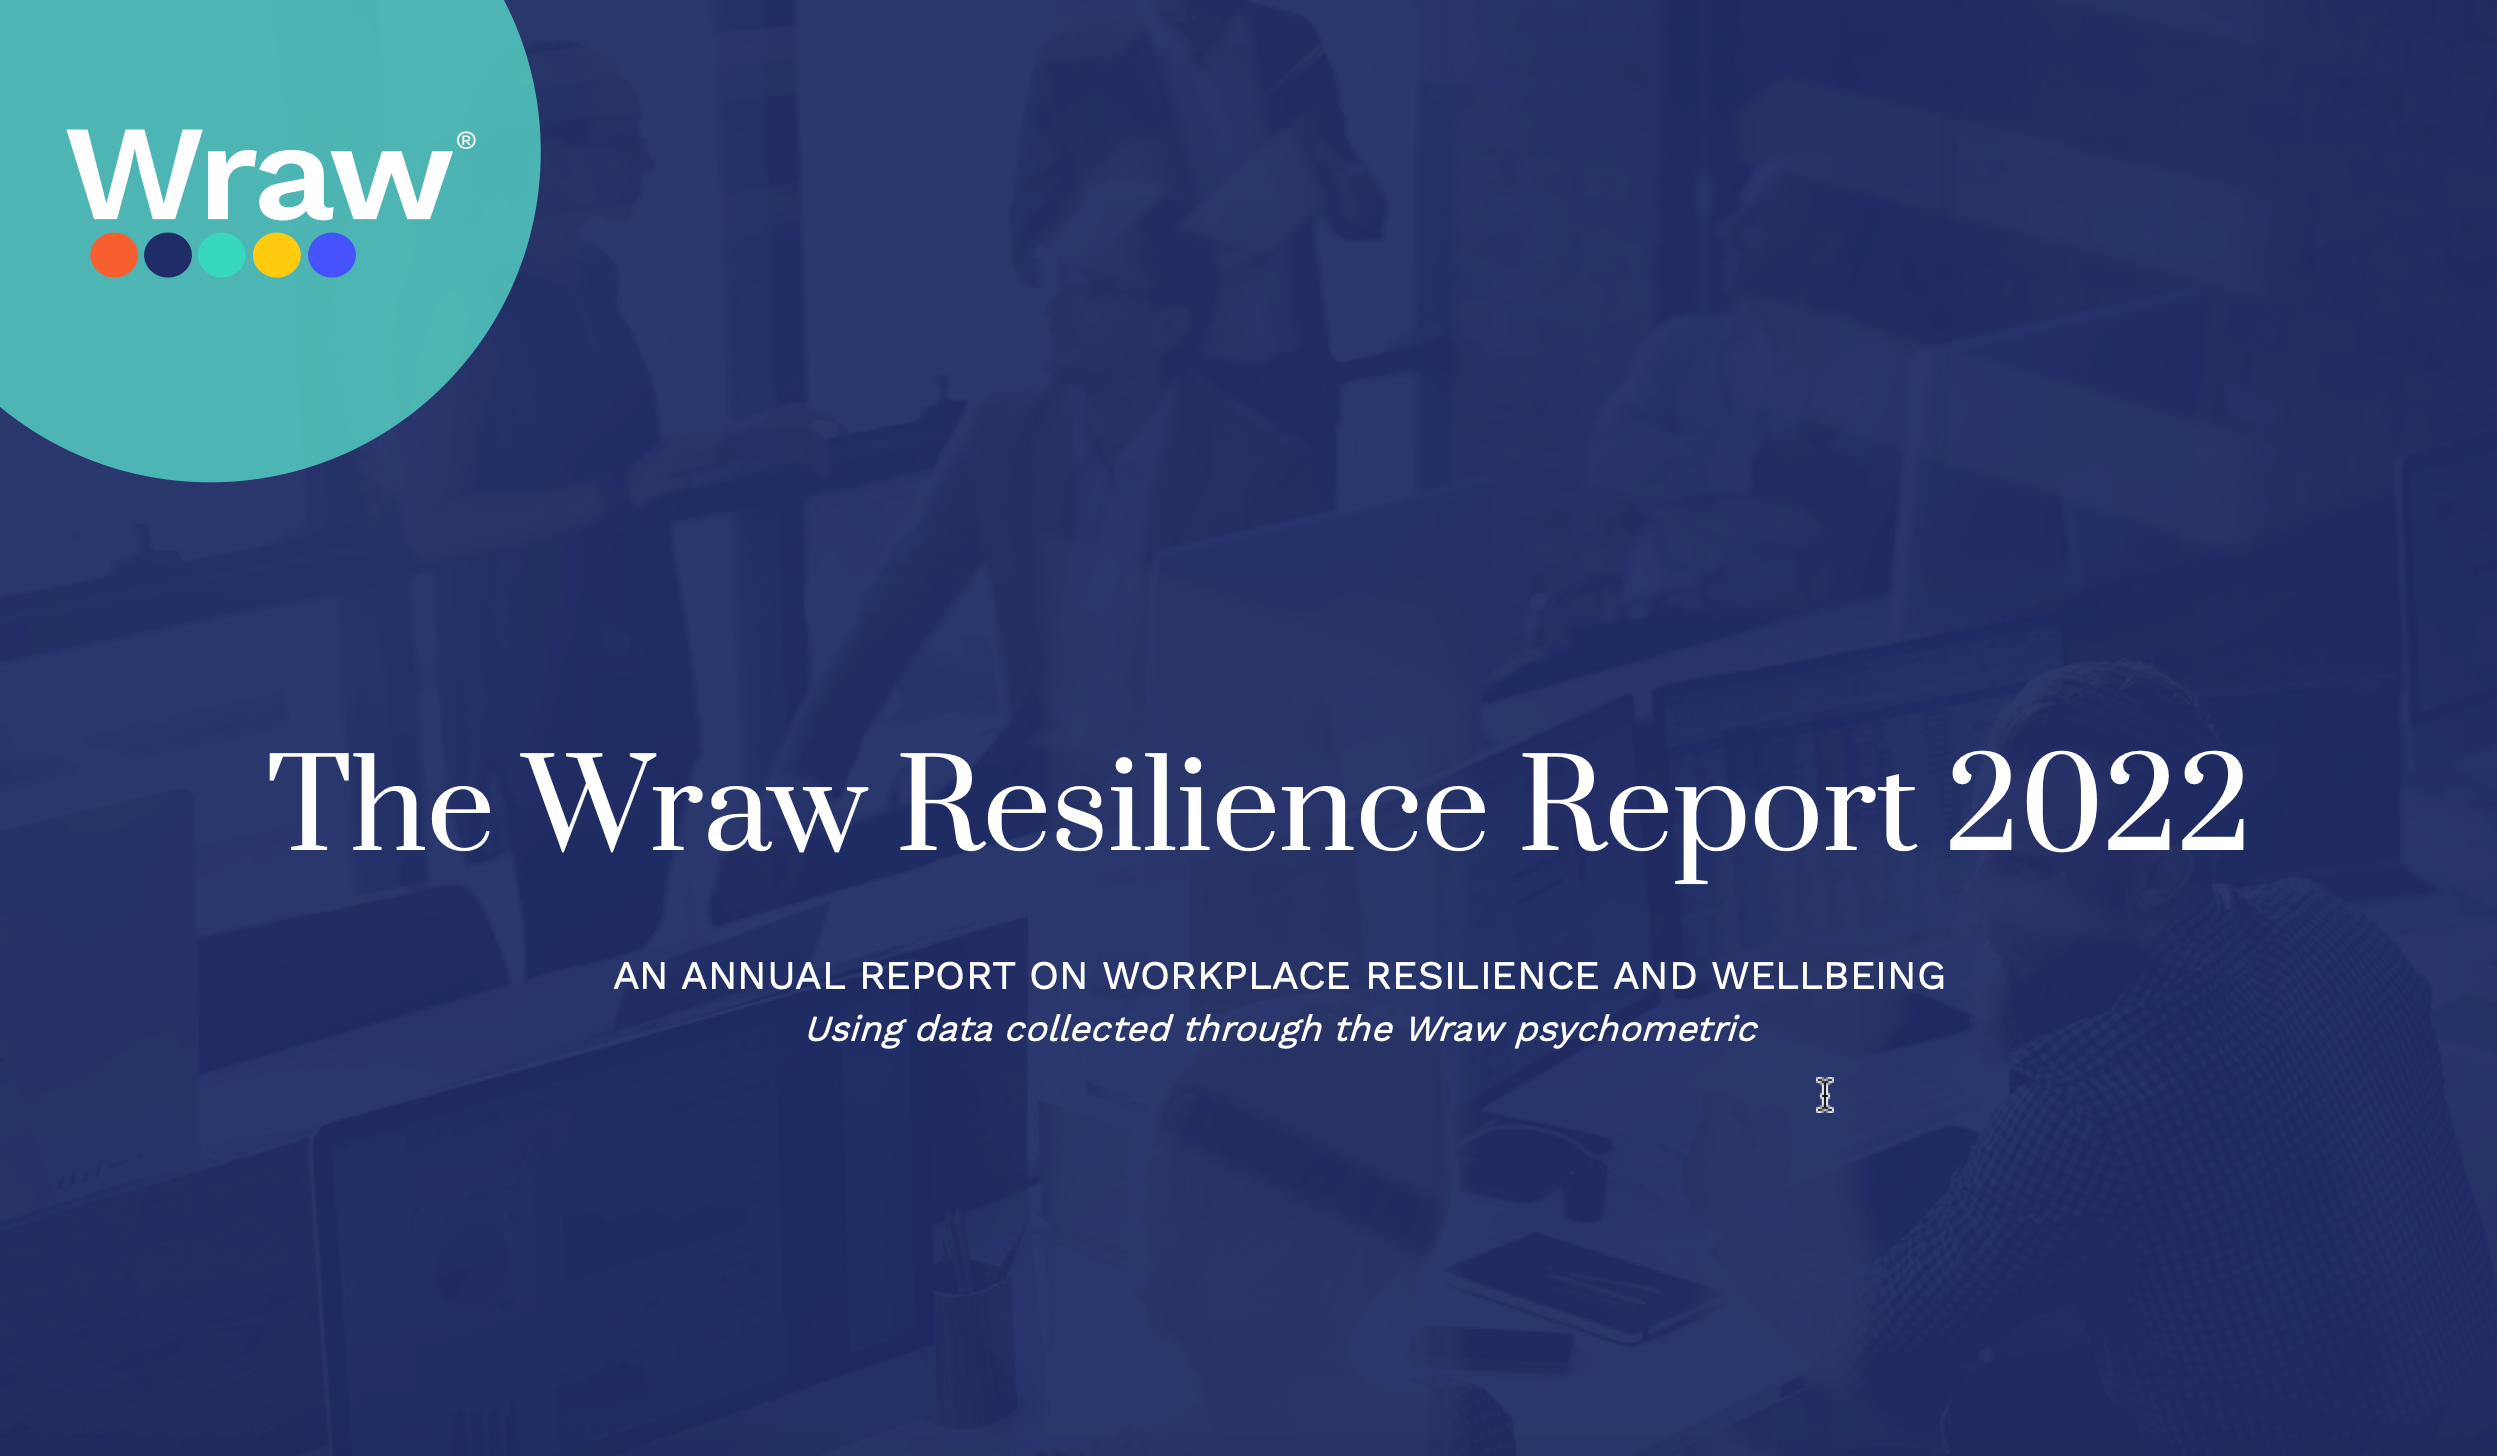 Wraw Resilience Report 2022